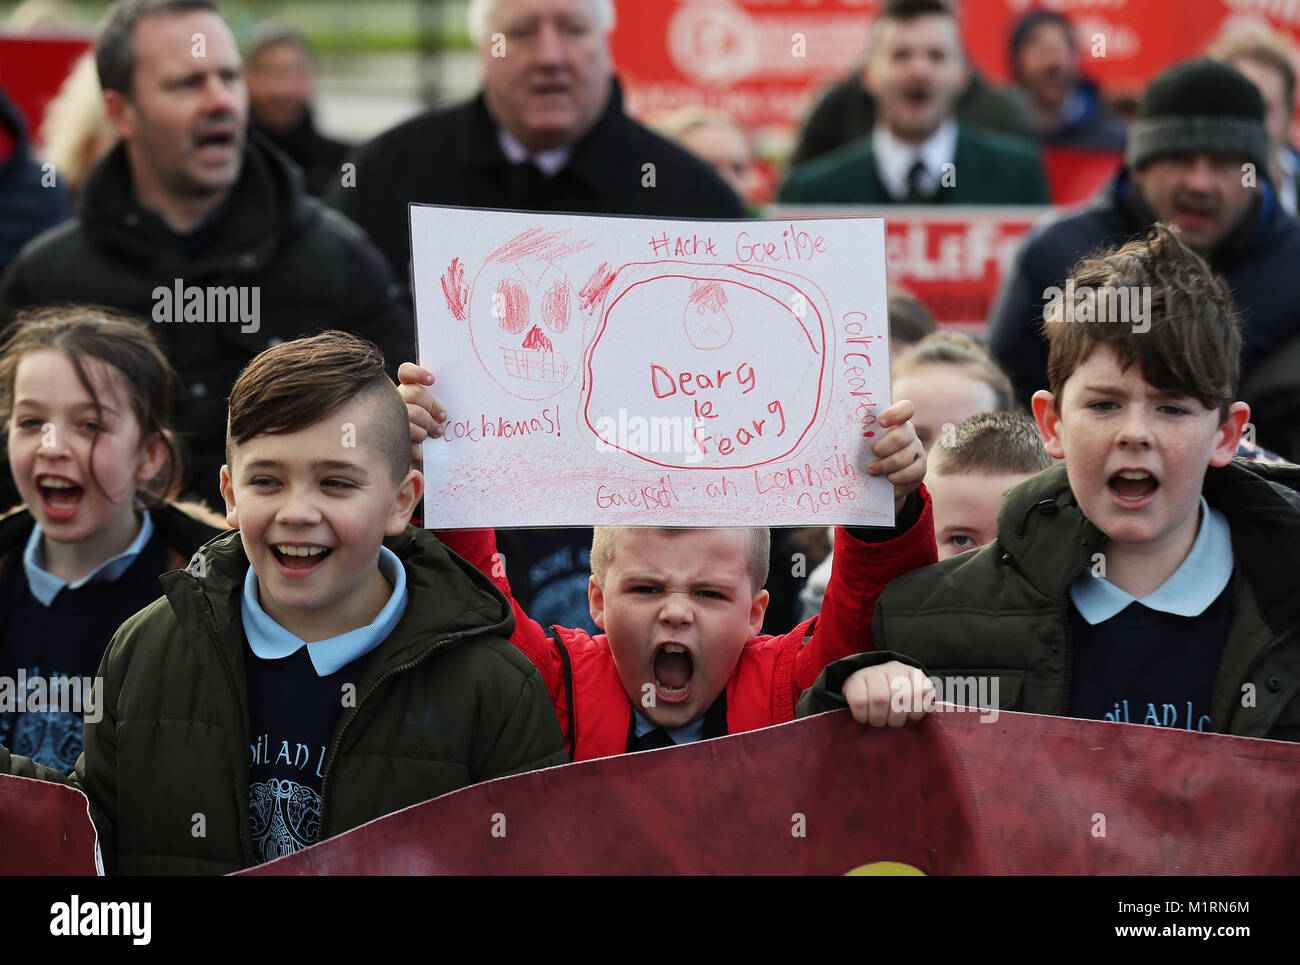 Irish language act campaigners, including pupils from Irish-medium schools across Northern Ireland, take part in a protest at Stormont parliament buildings in Belfast, ahead of a meeting with Northern Ireland Secretary Karen Bradley. Stock Photo